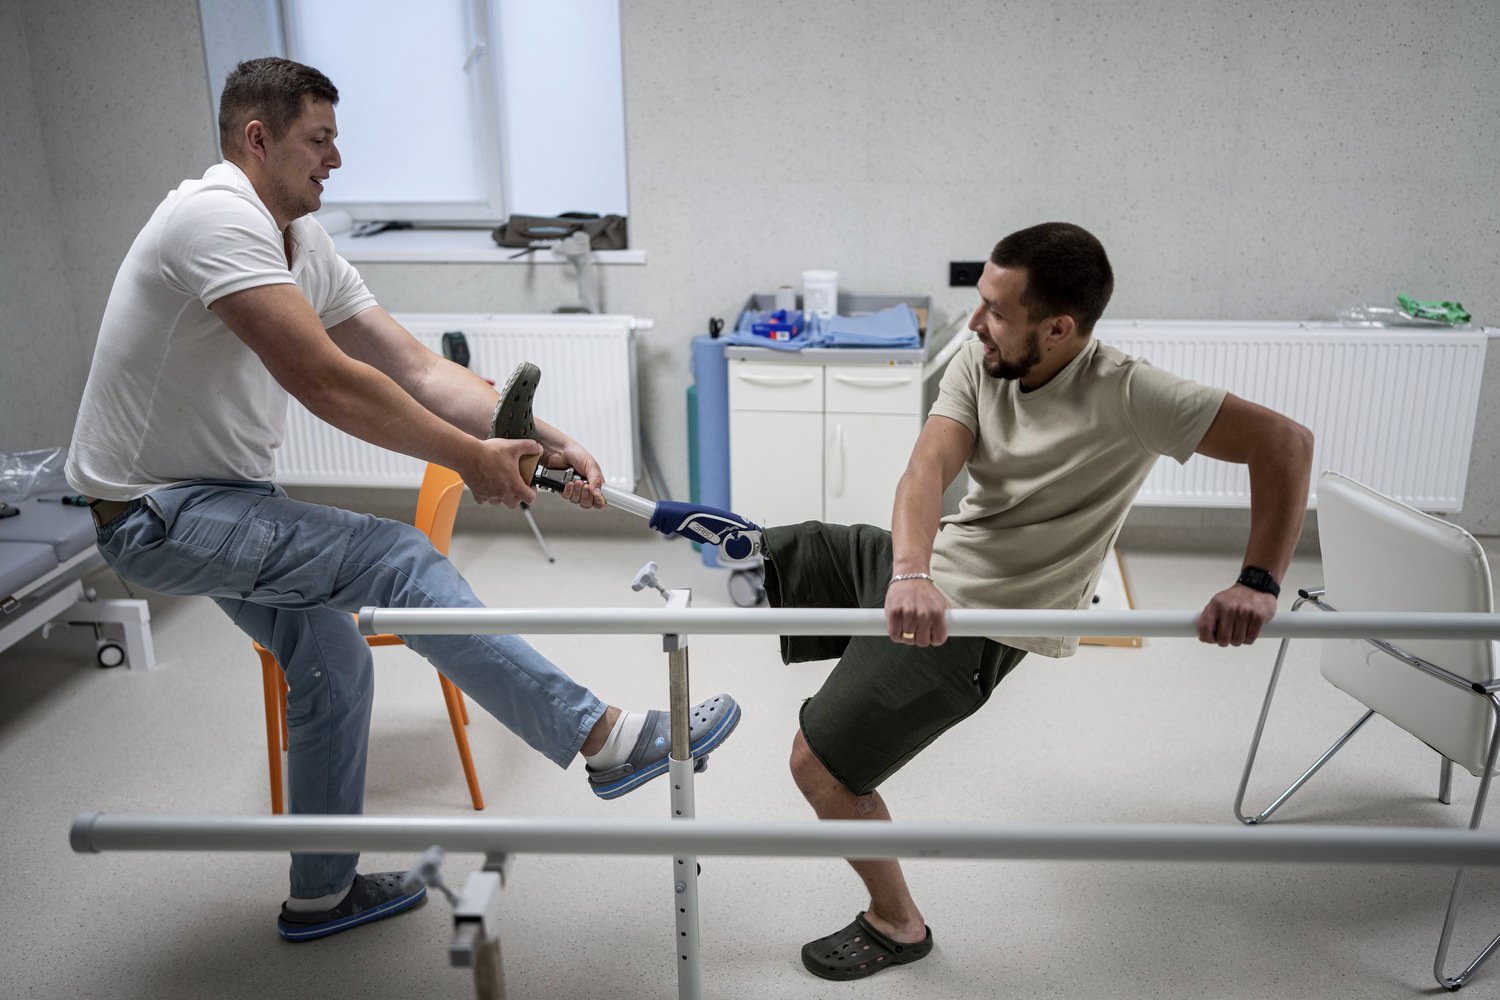  Dmytro Kononchuk, left, a prosthetist, tests Ruslan's prosthesis at the Superhumans rehabilitation center in Vynnyky, Ukraine, Thursday, July 20, 2023. Ukraine is facing the prospect of a future with upwards of 20,000 amputees, many of them soldiers